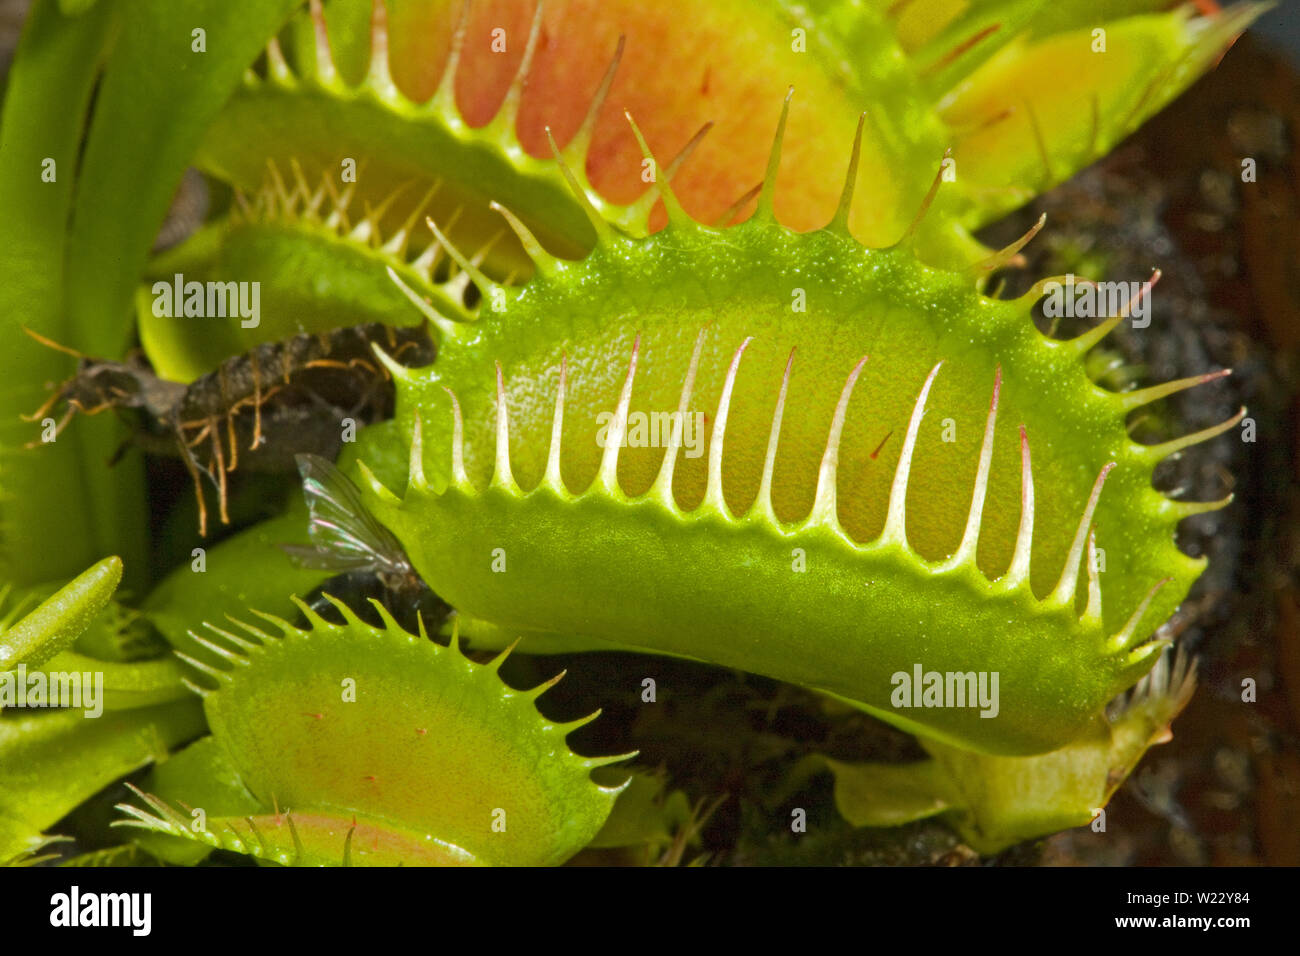 The Venus flytrap (Dionaea muscipula), is a carniverous plant common in the southeast portion of the United States. Stock Photo